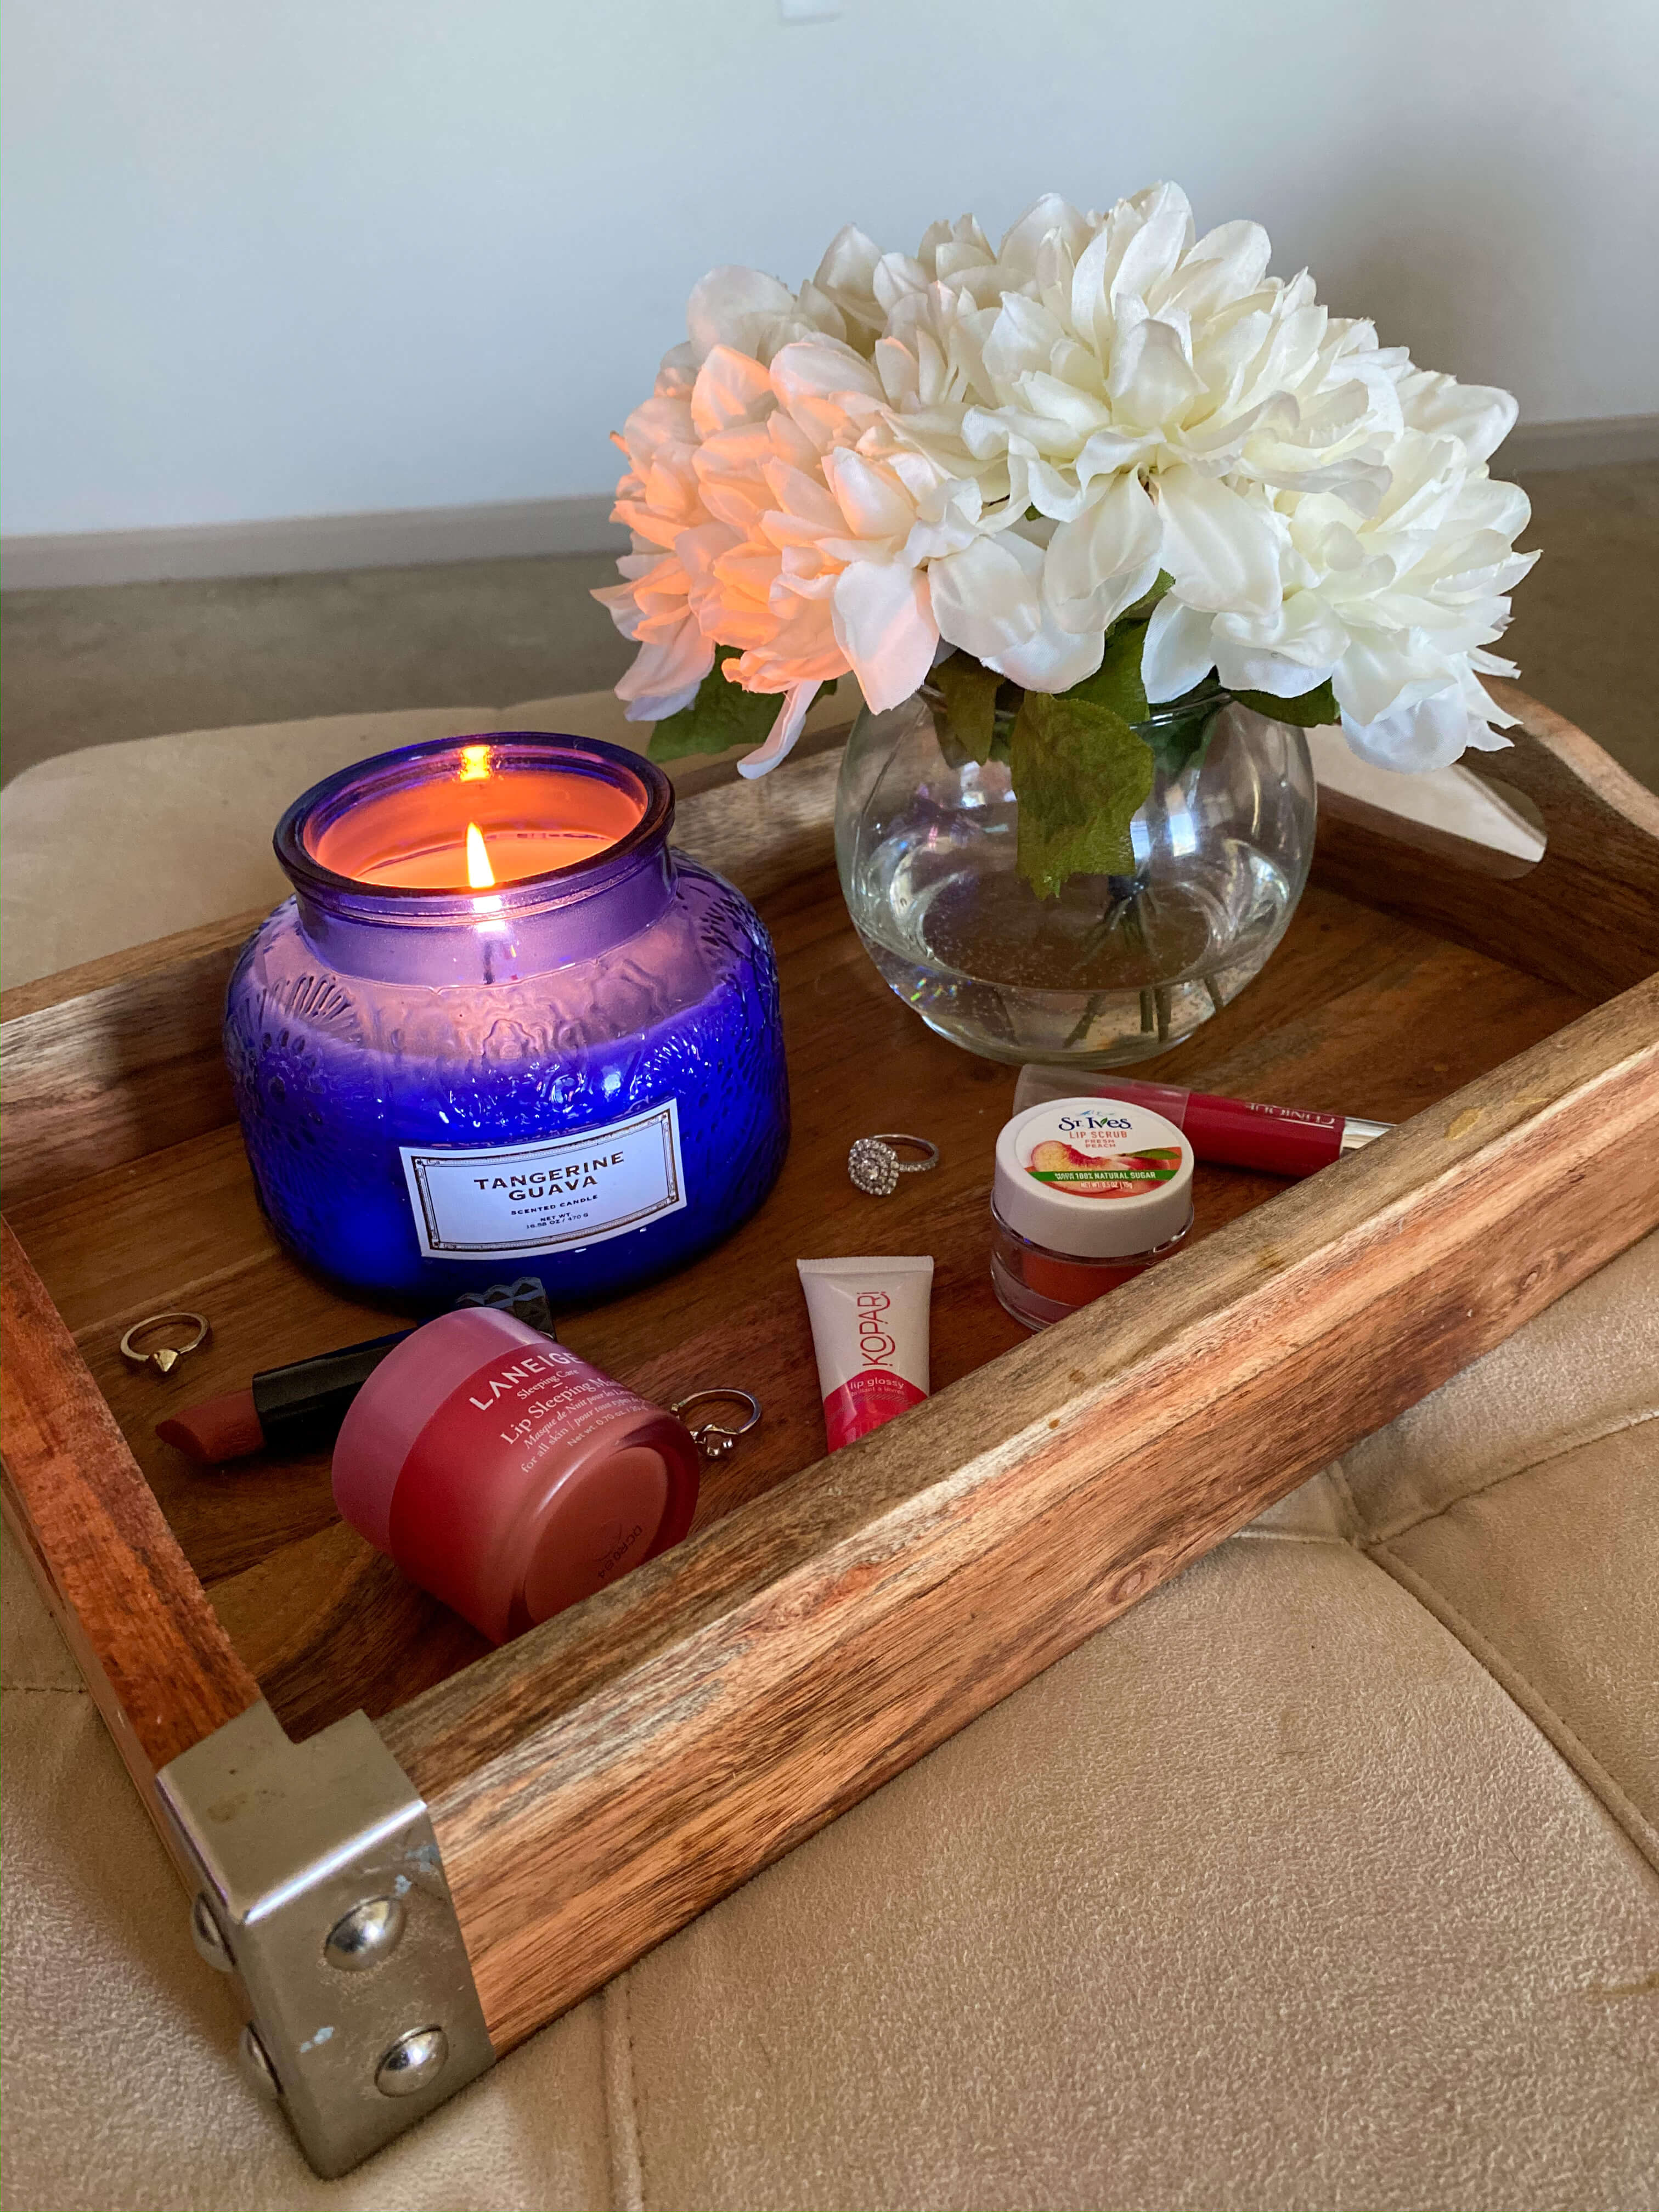 When it comes to winter, my skin and lips take the biggest toll and end up being super dry! I’m sharing my winter lip care routine that leaves my lips soft and moisturized for the winter season. #liproutine #beautyroutine #lipproducts #Lippies 